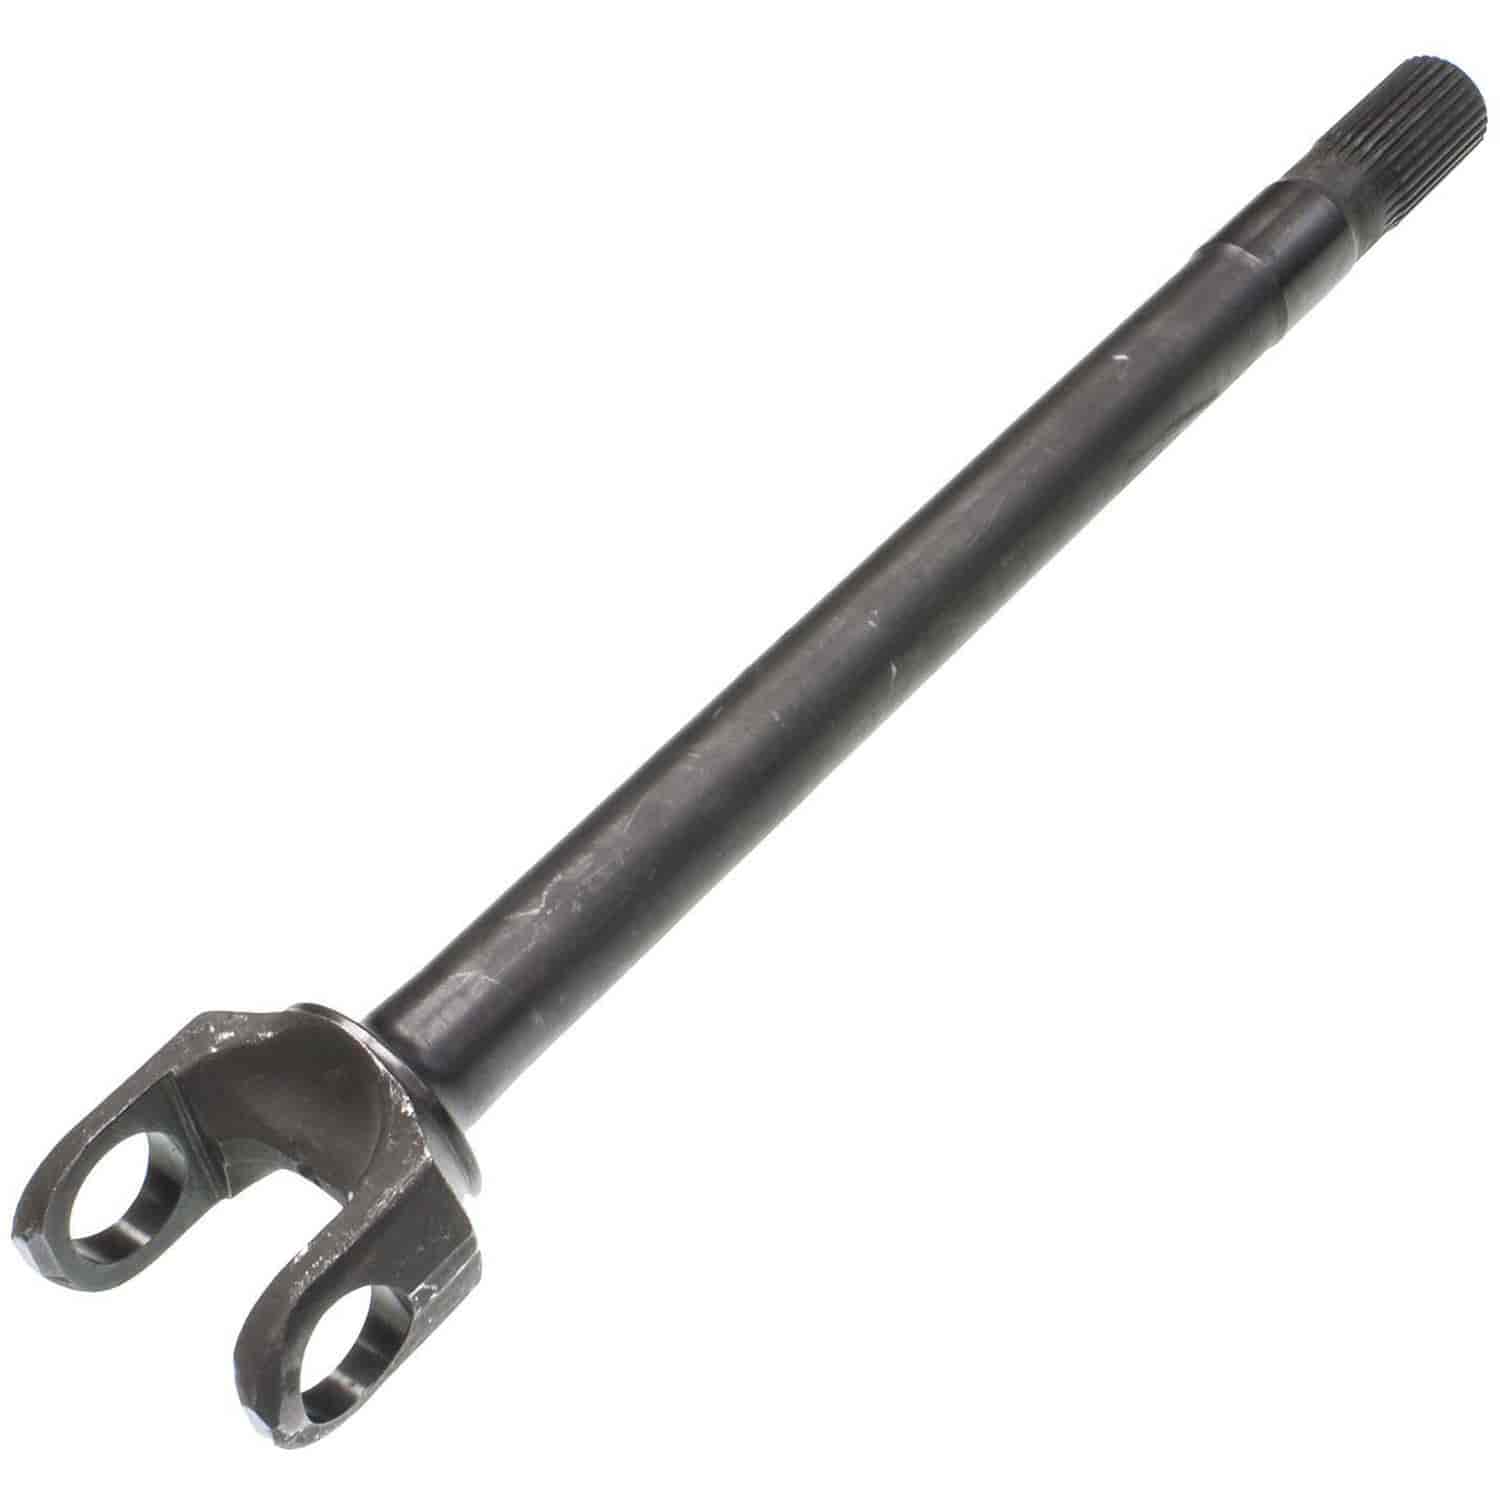 Axle Shaft 18.91 in. Overall Length 30 Spline Black Oxide Badged Under The Ten Factory Product Line